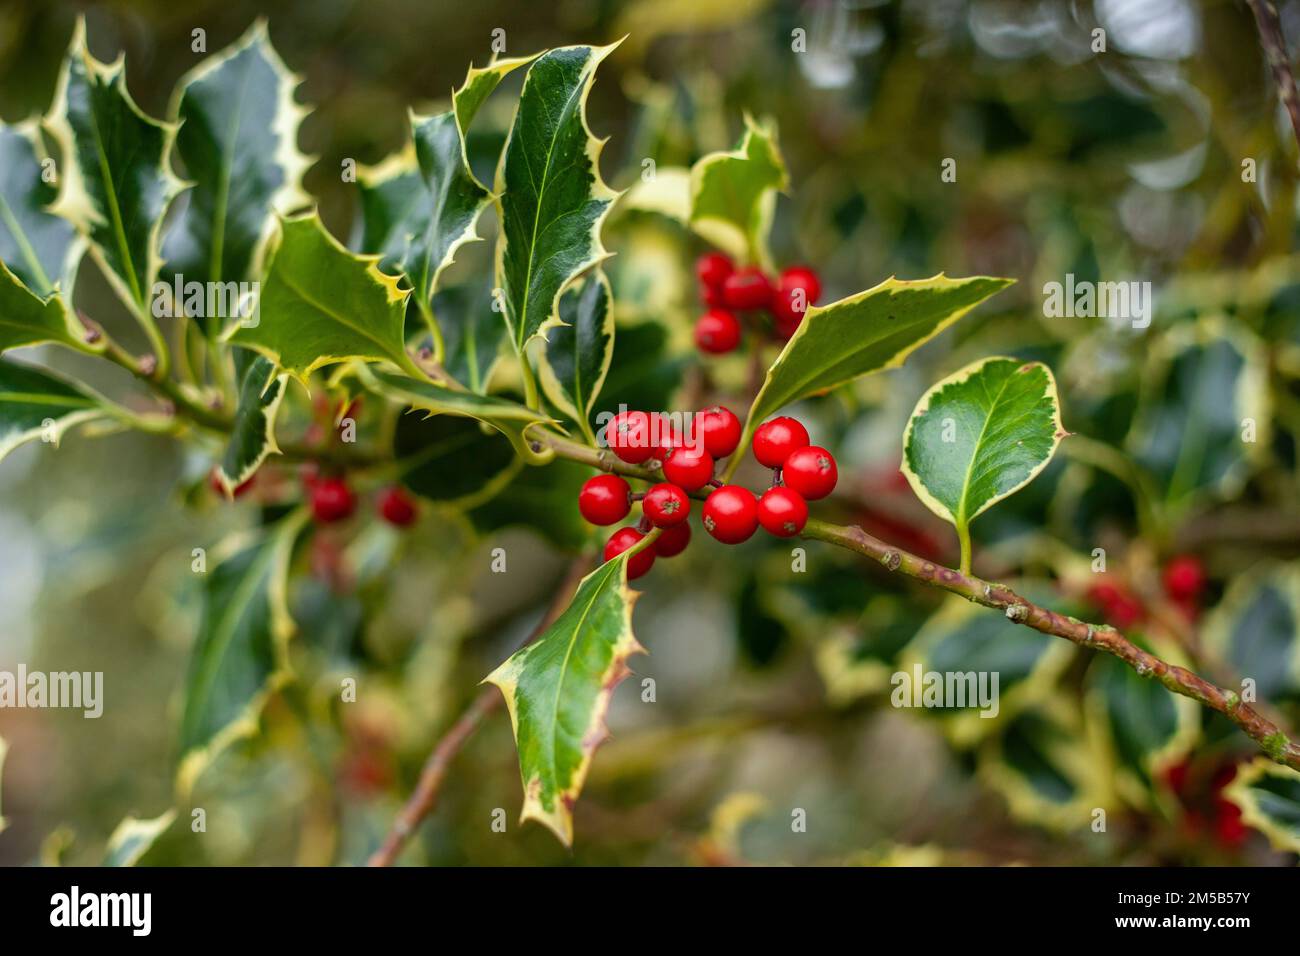 A closeup shot of Christmas holly plant branch decoration with ripe red berries Stock Photo